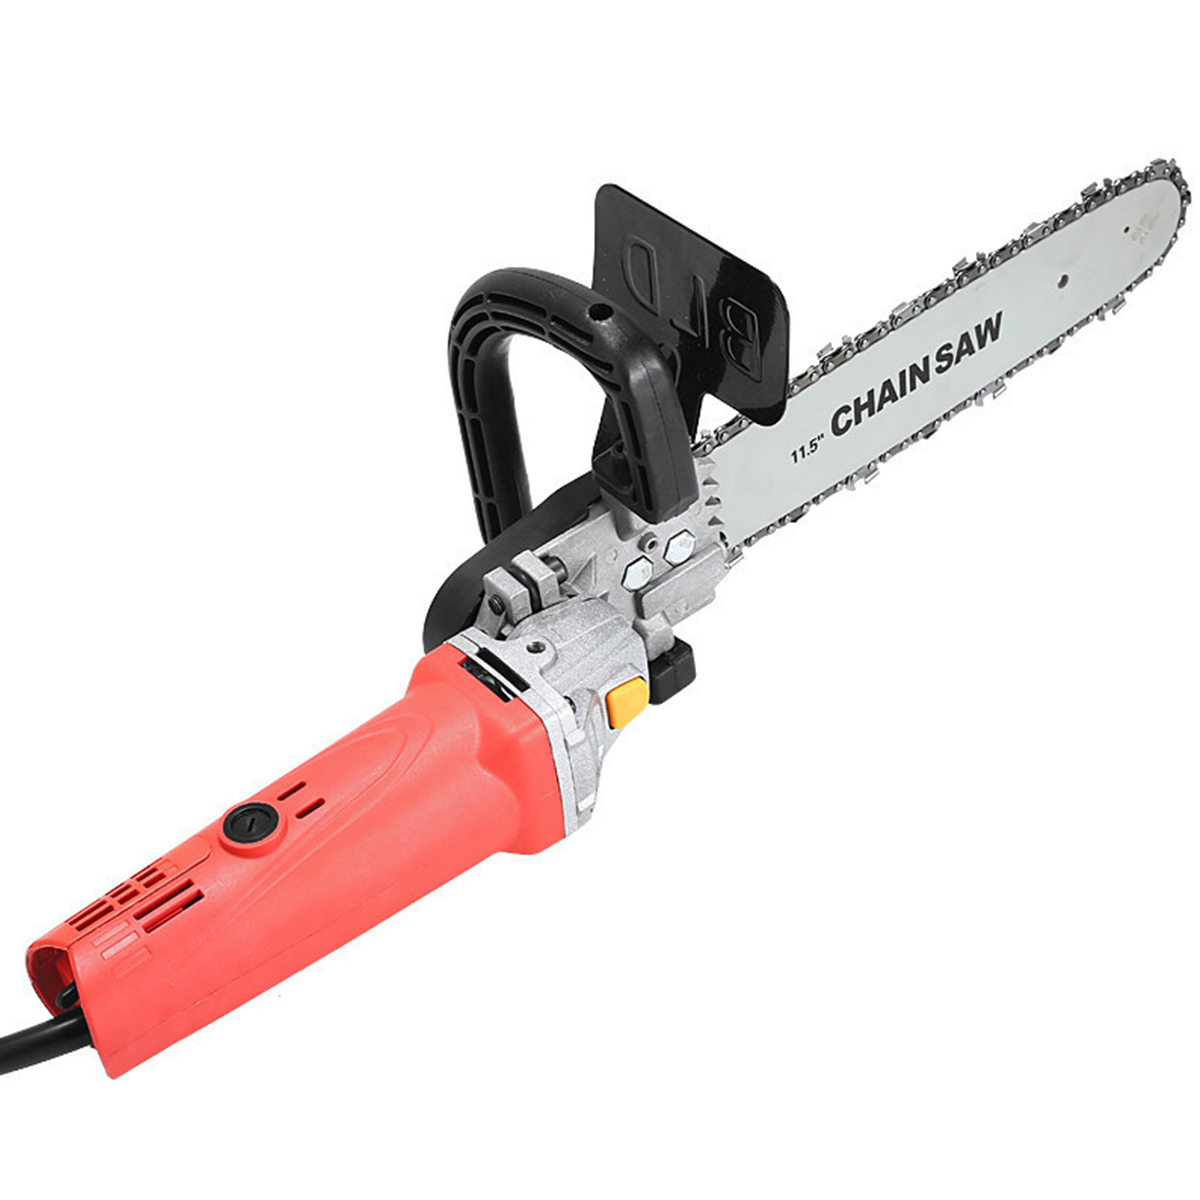 

220V 1000W 10000RPM Electric Angle Grinder with 12 inch Chain Saw Chainsaw Bracket Set